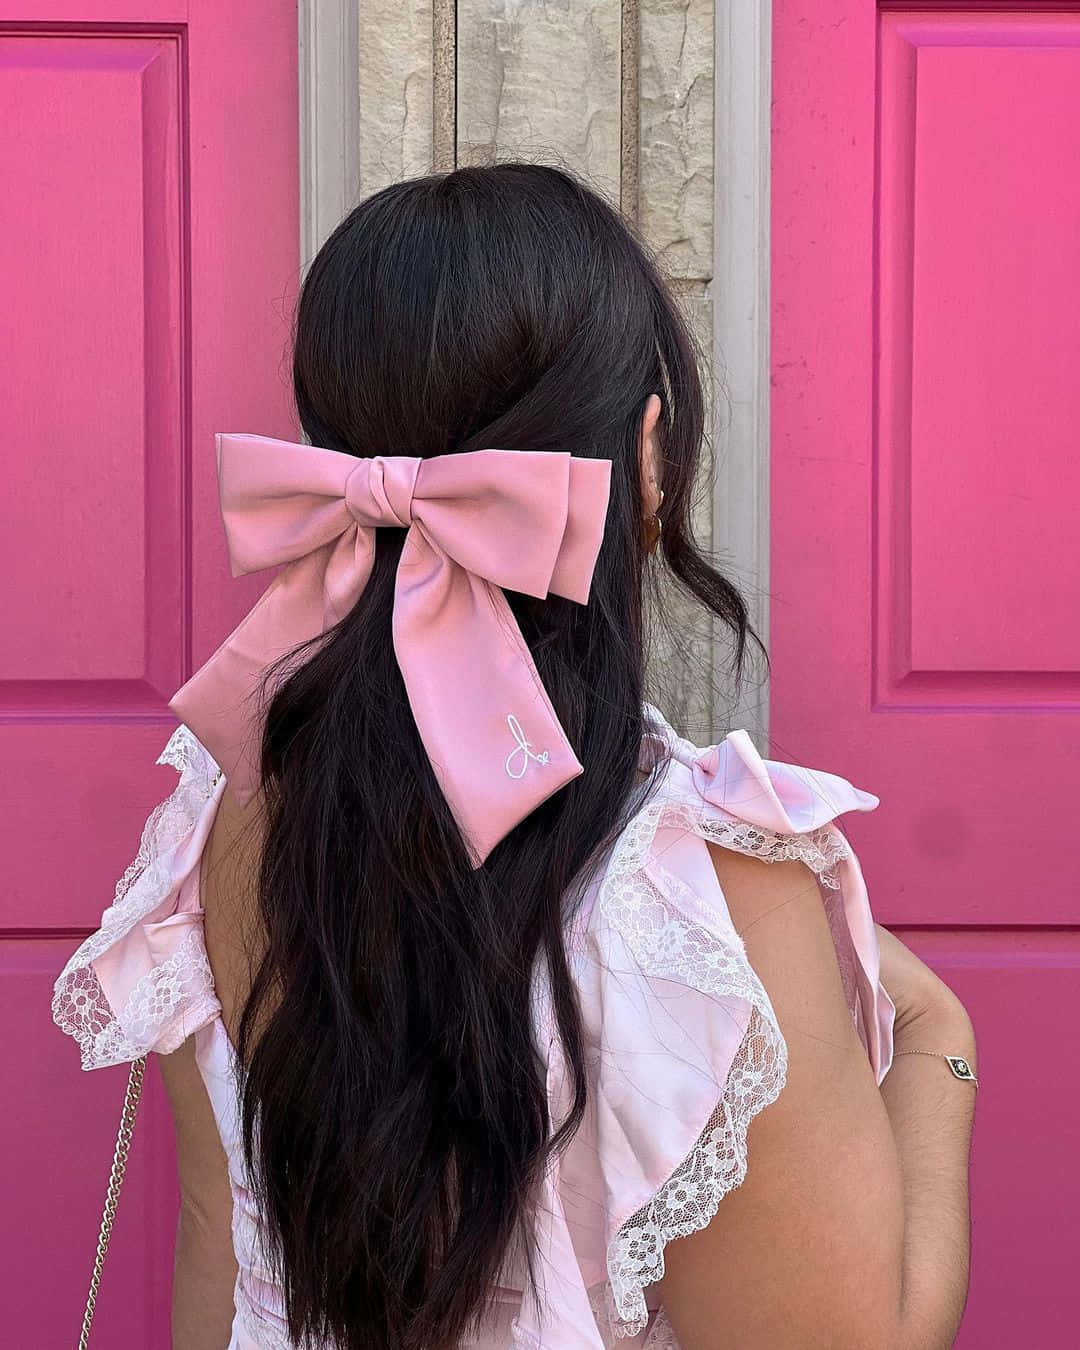 Pink Bow Hair Accessory Against Pink Door Wallpaper